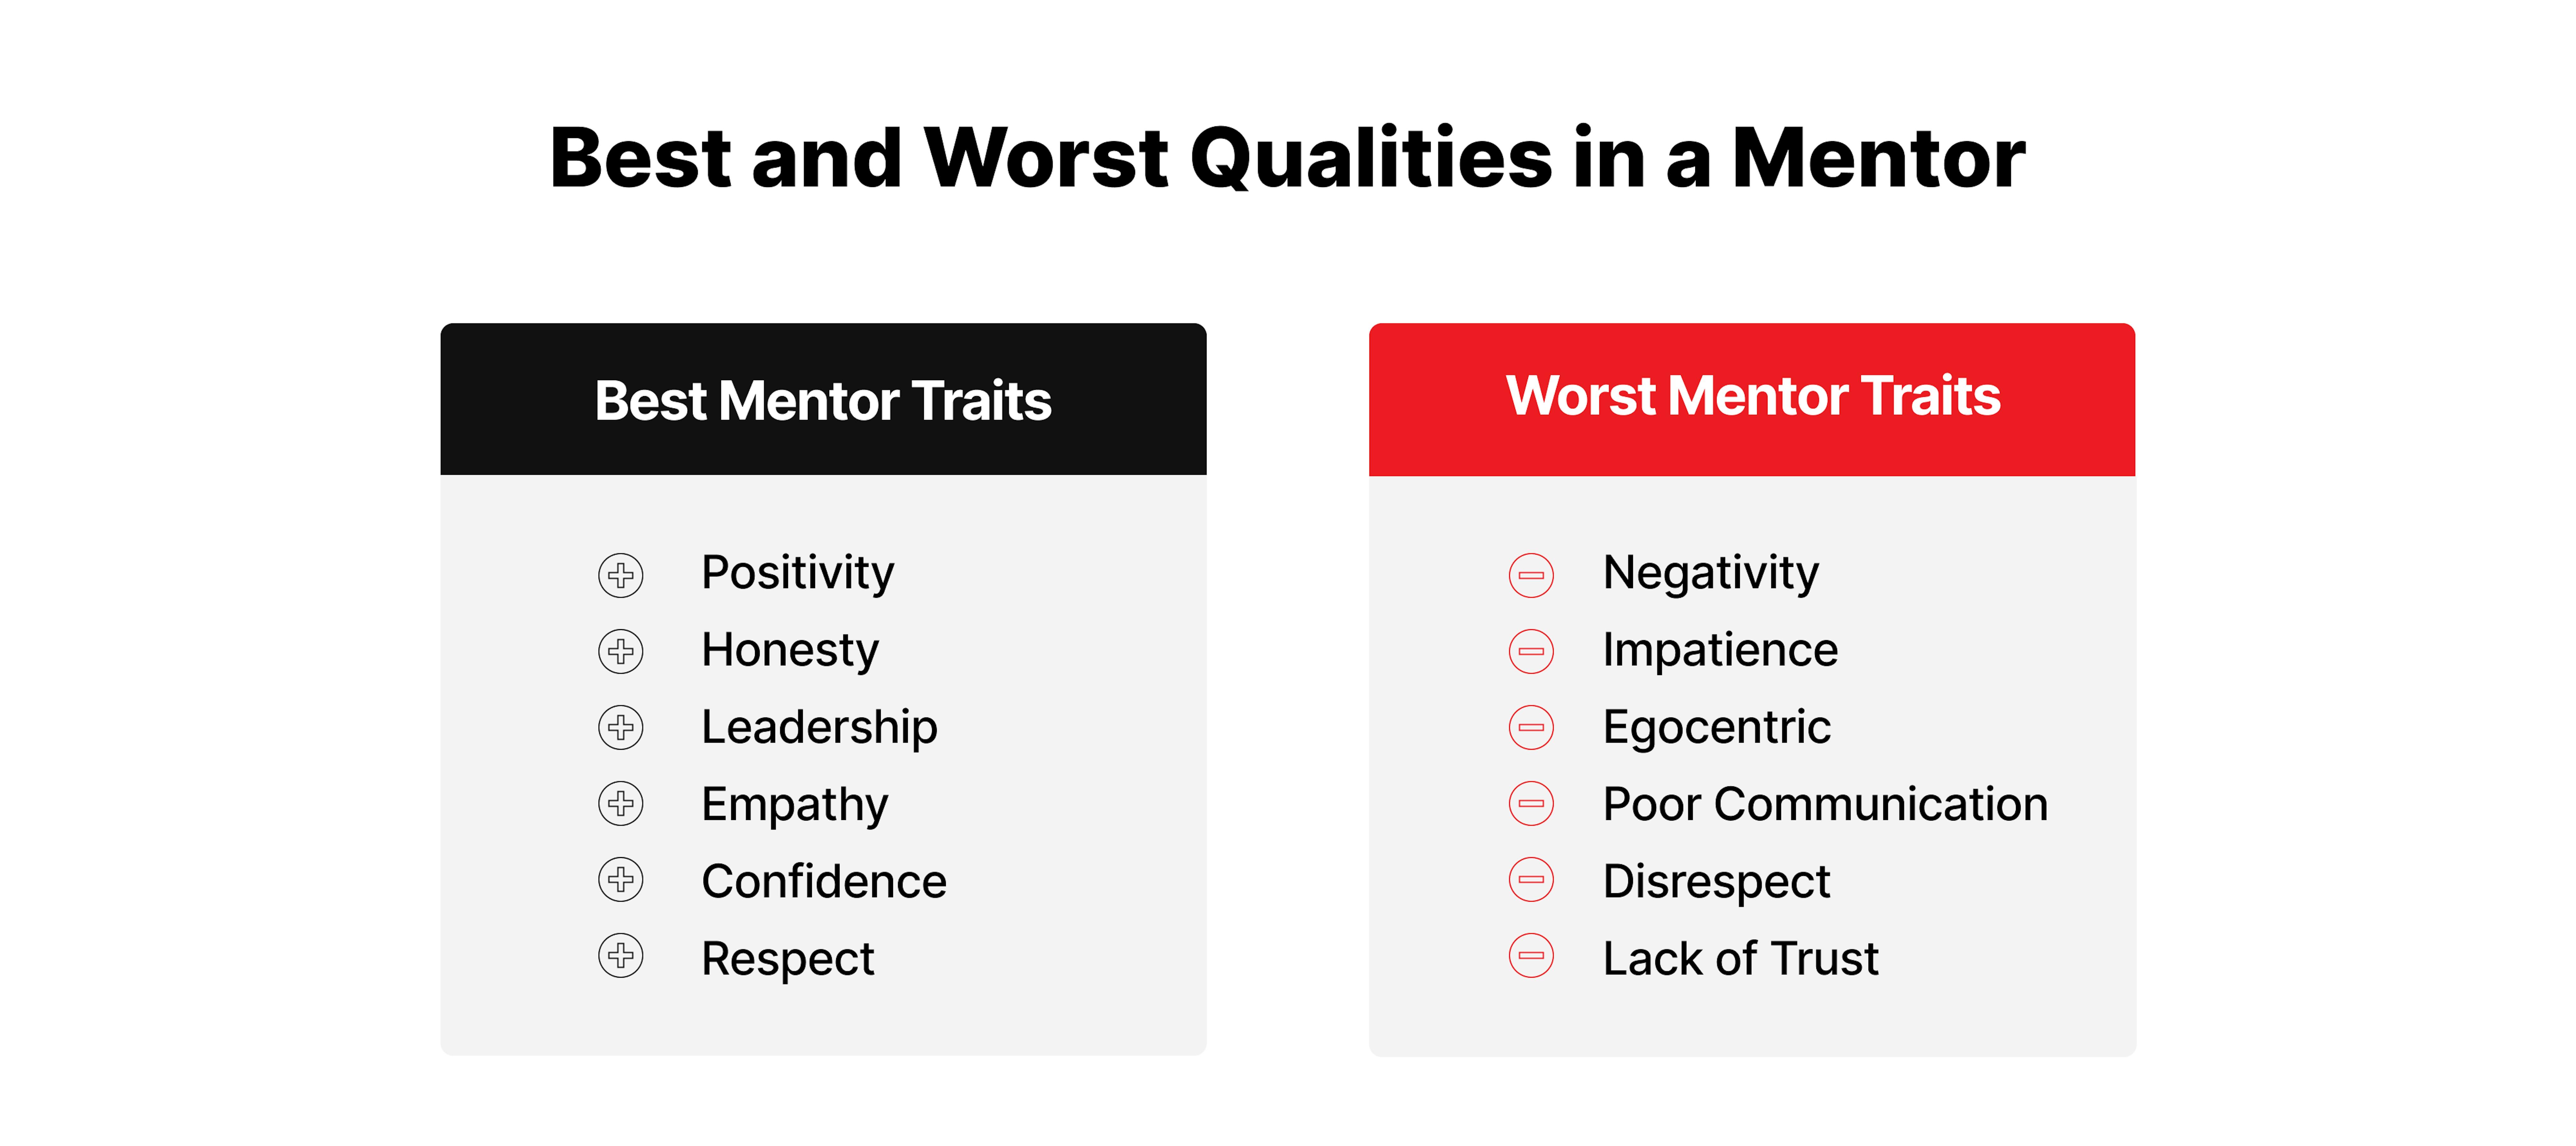 Qualities in a Mentor